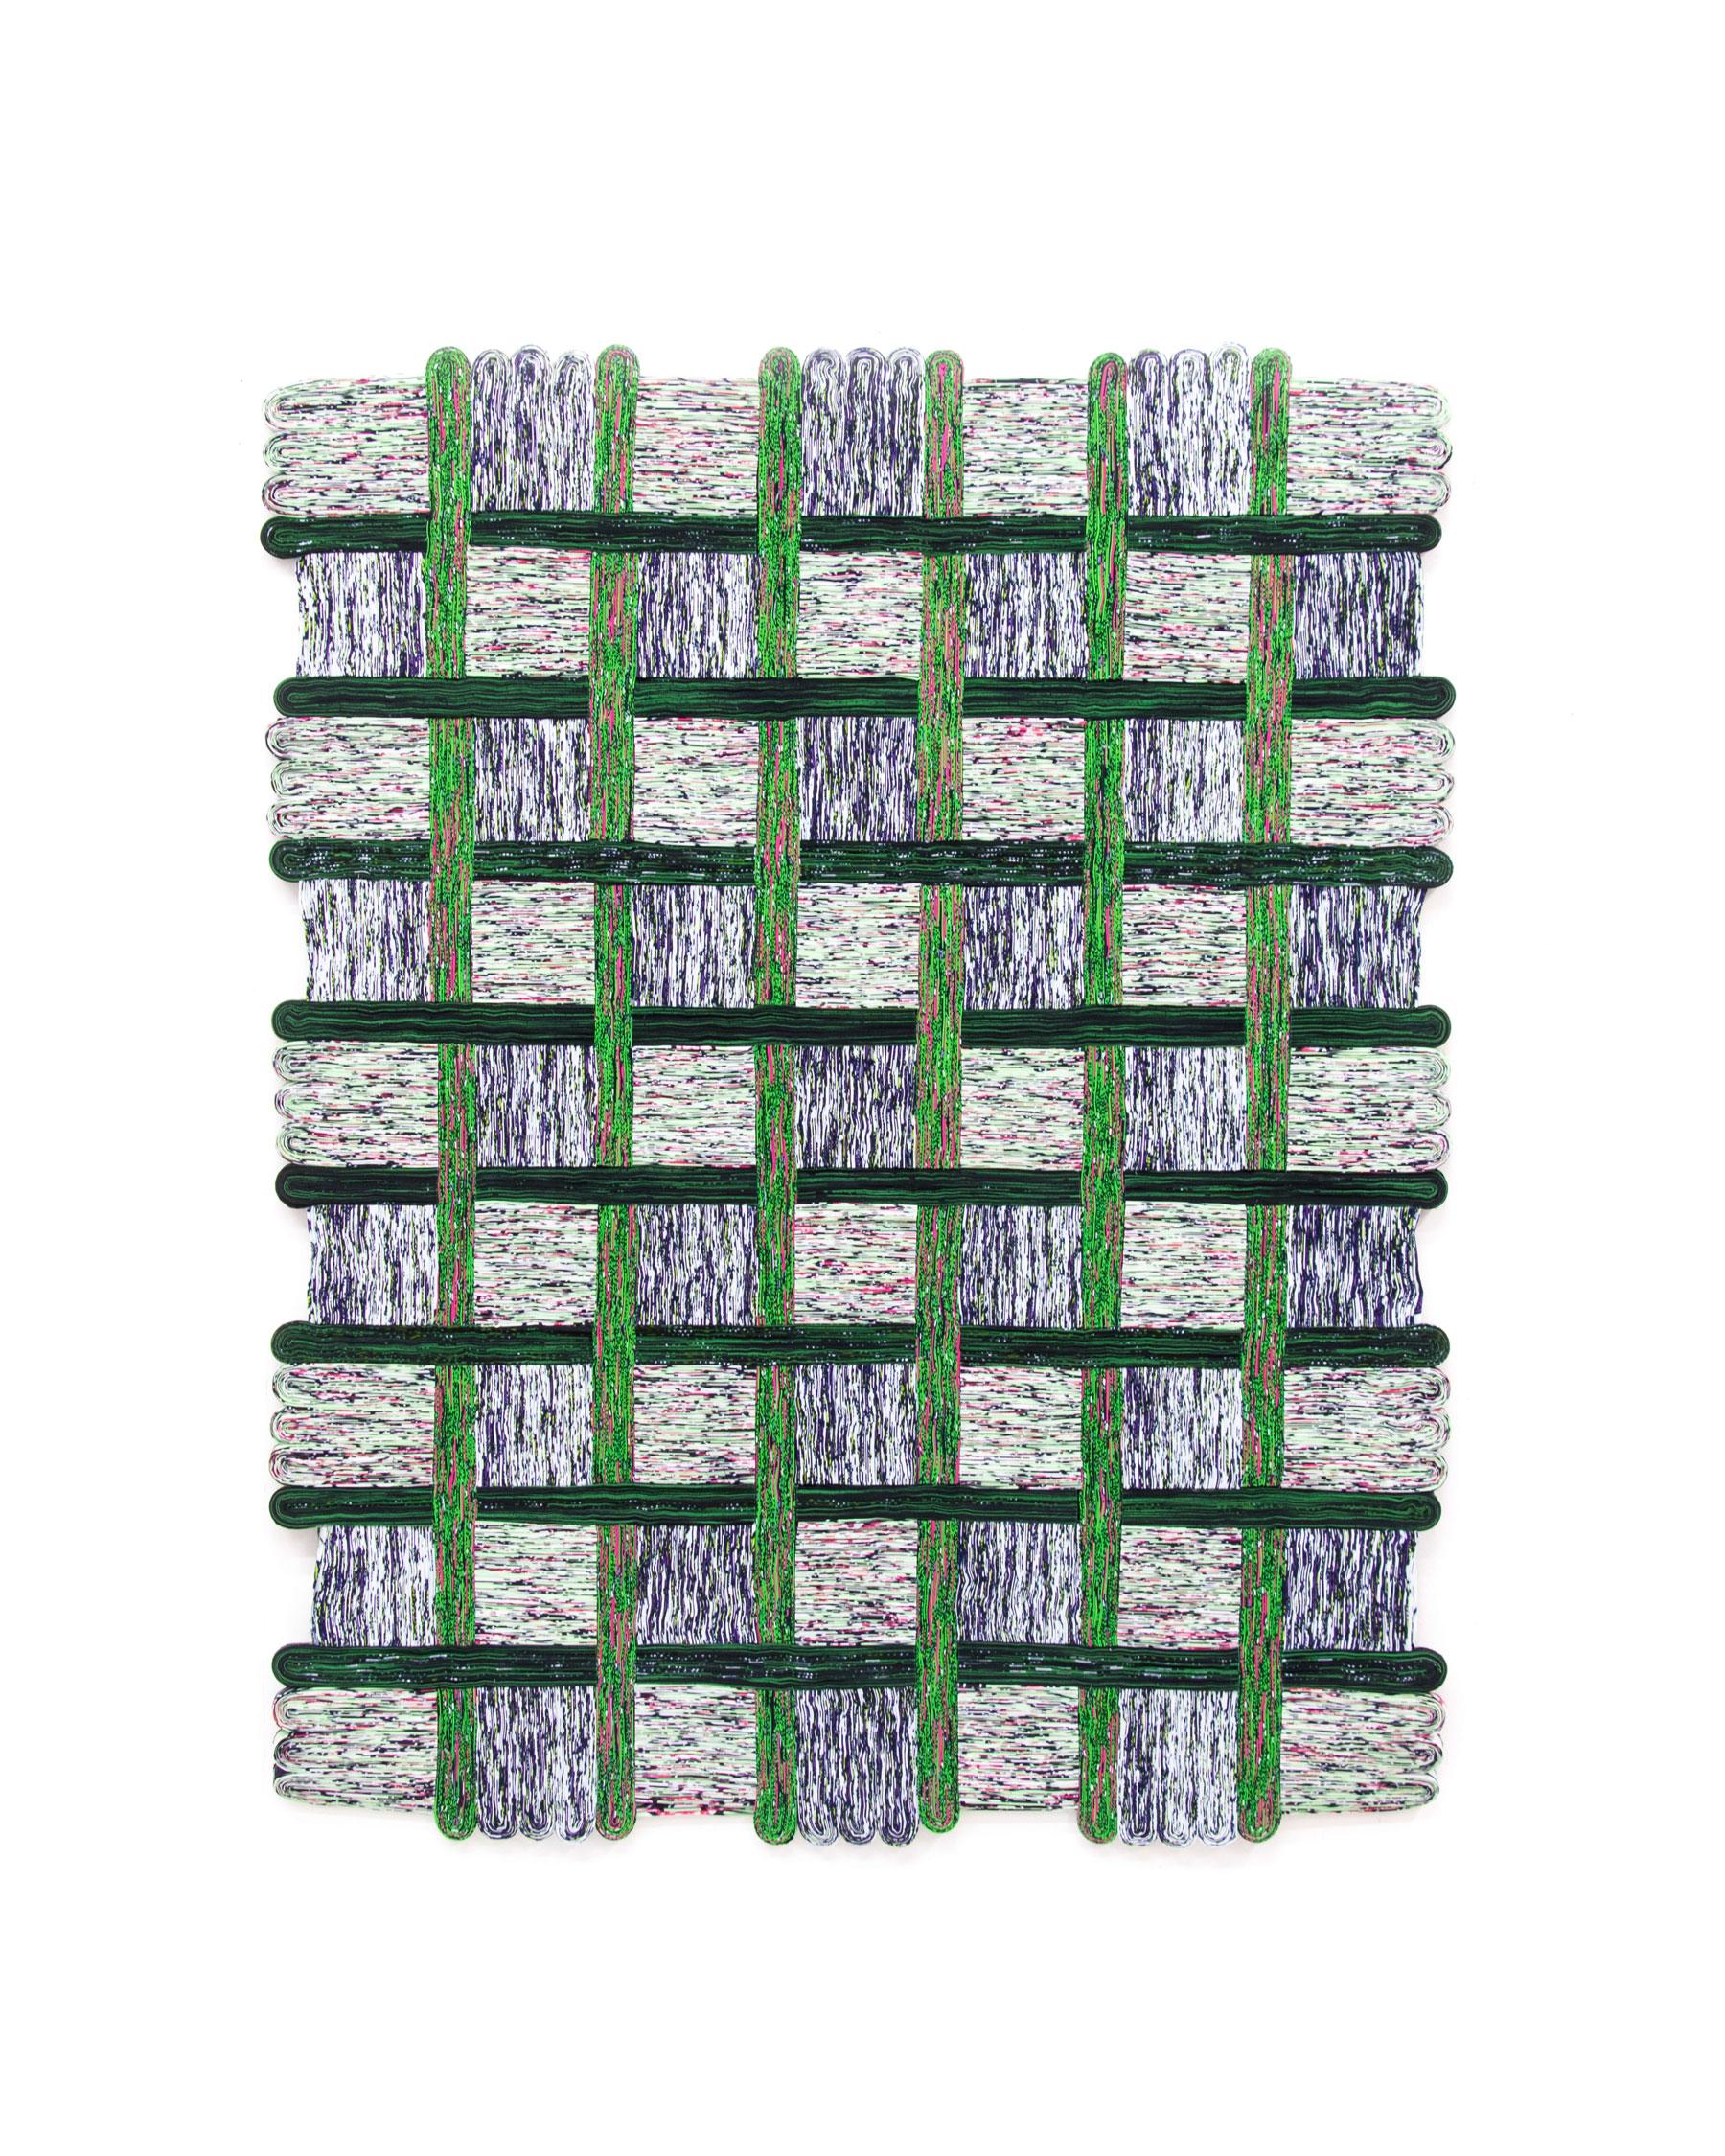 Woven Wall Tapestry - Green Checkered - Mixed Media Art by Simone Post